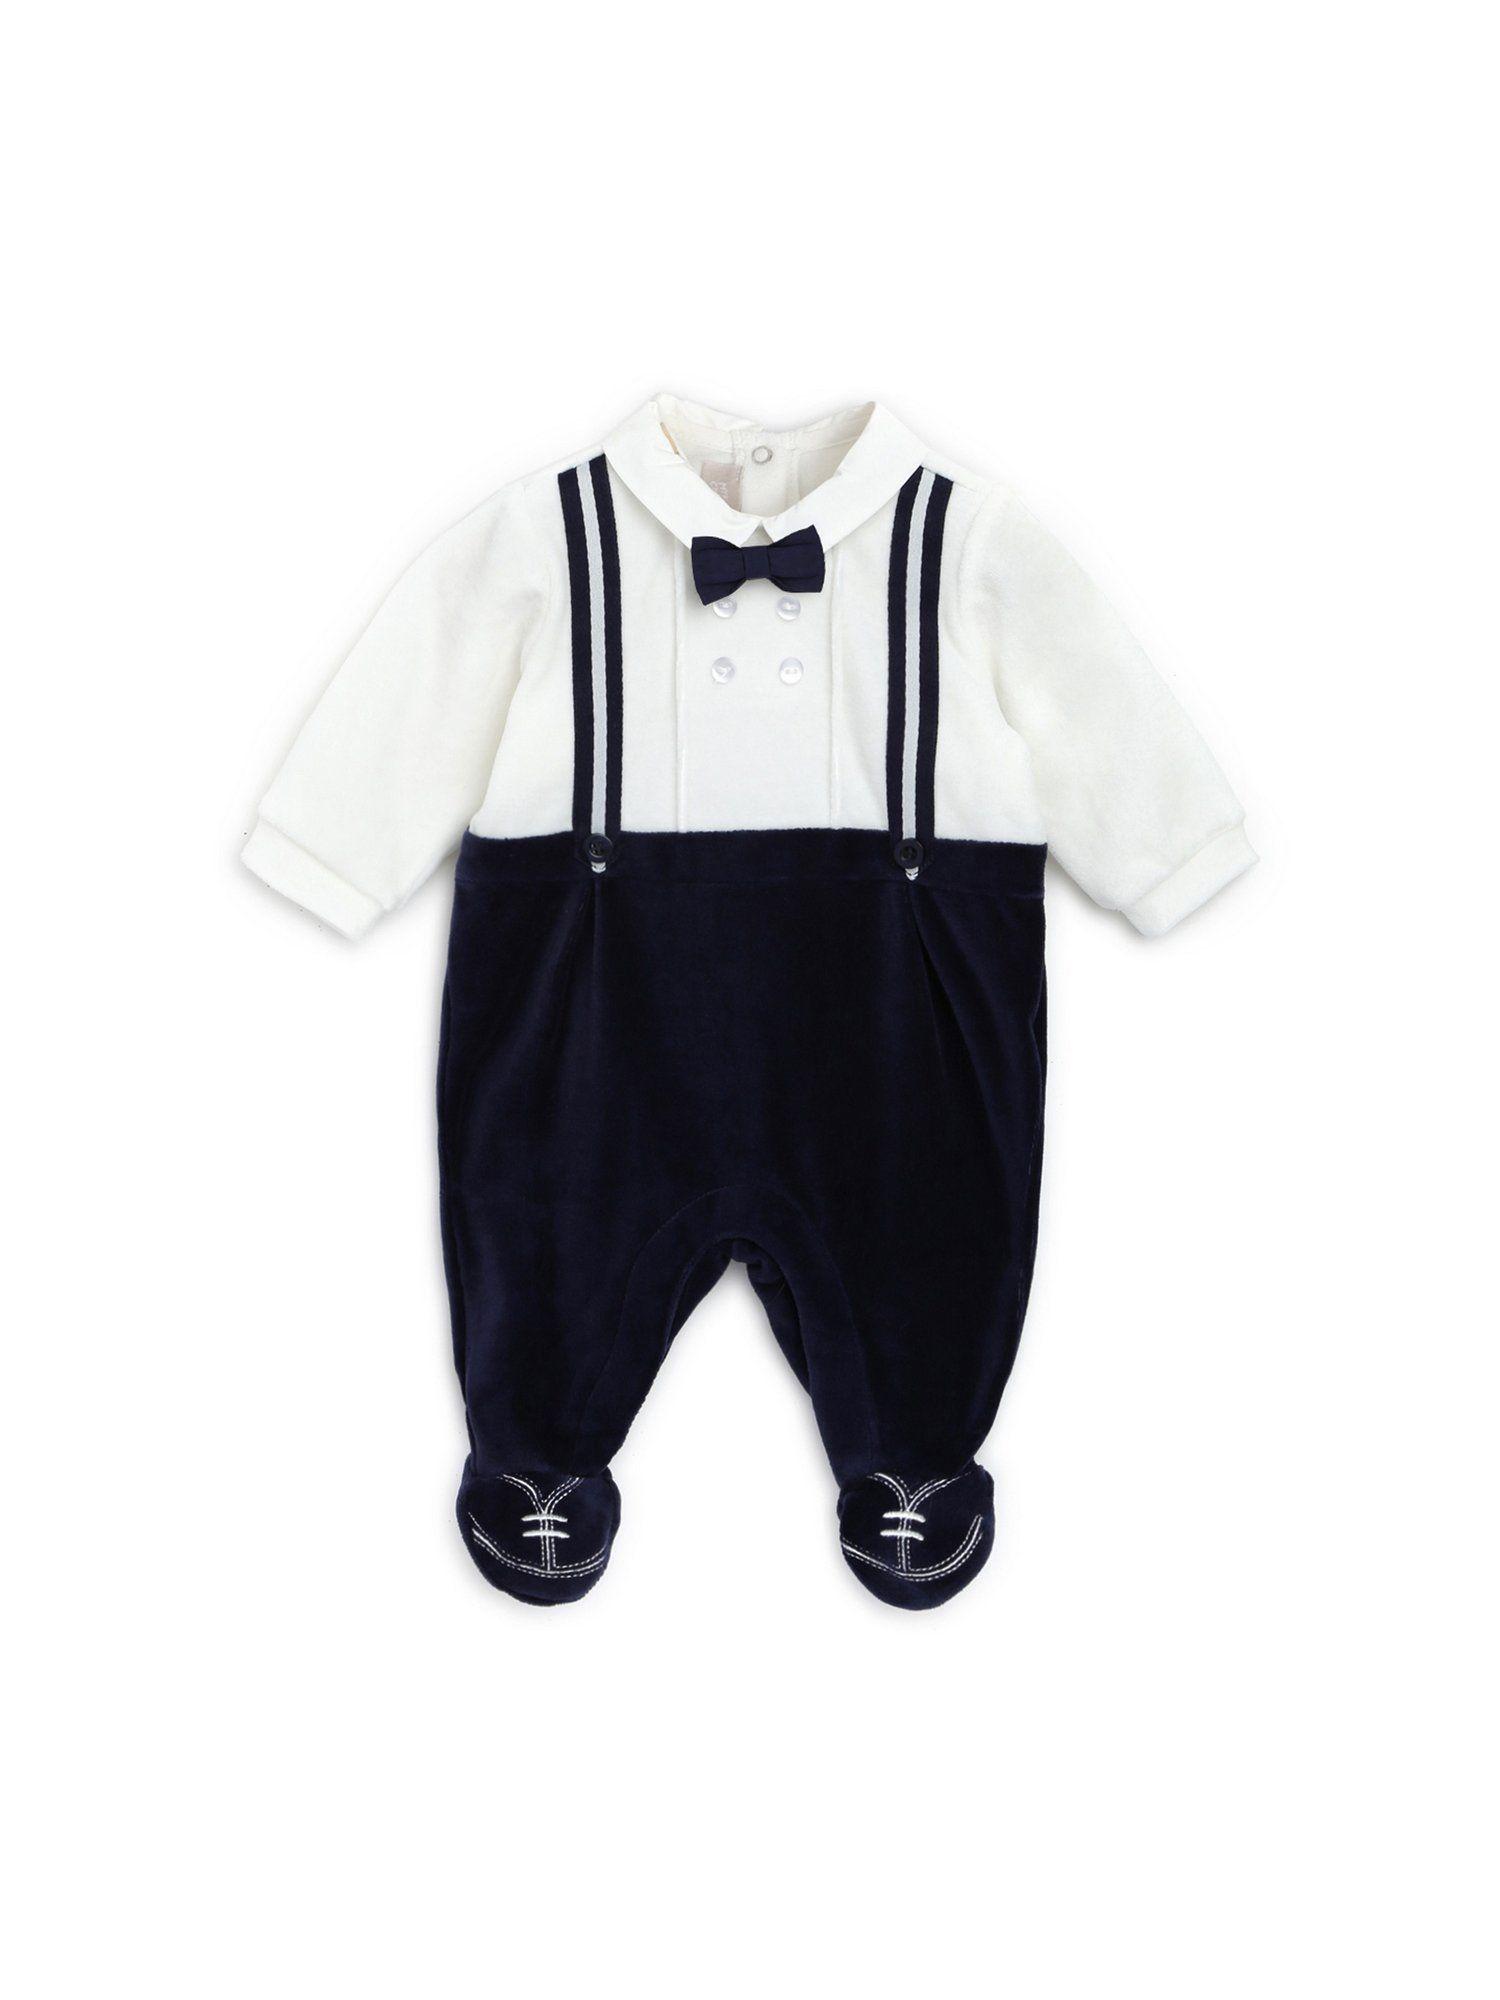 boys white & blue leg opening rompers with bow tie (set of 2)